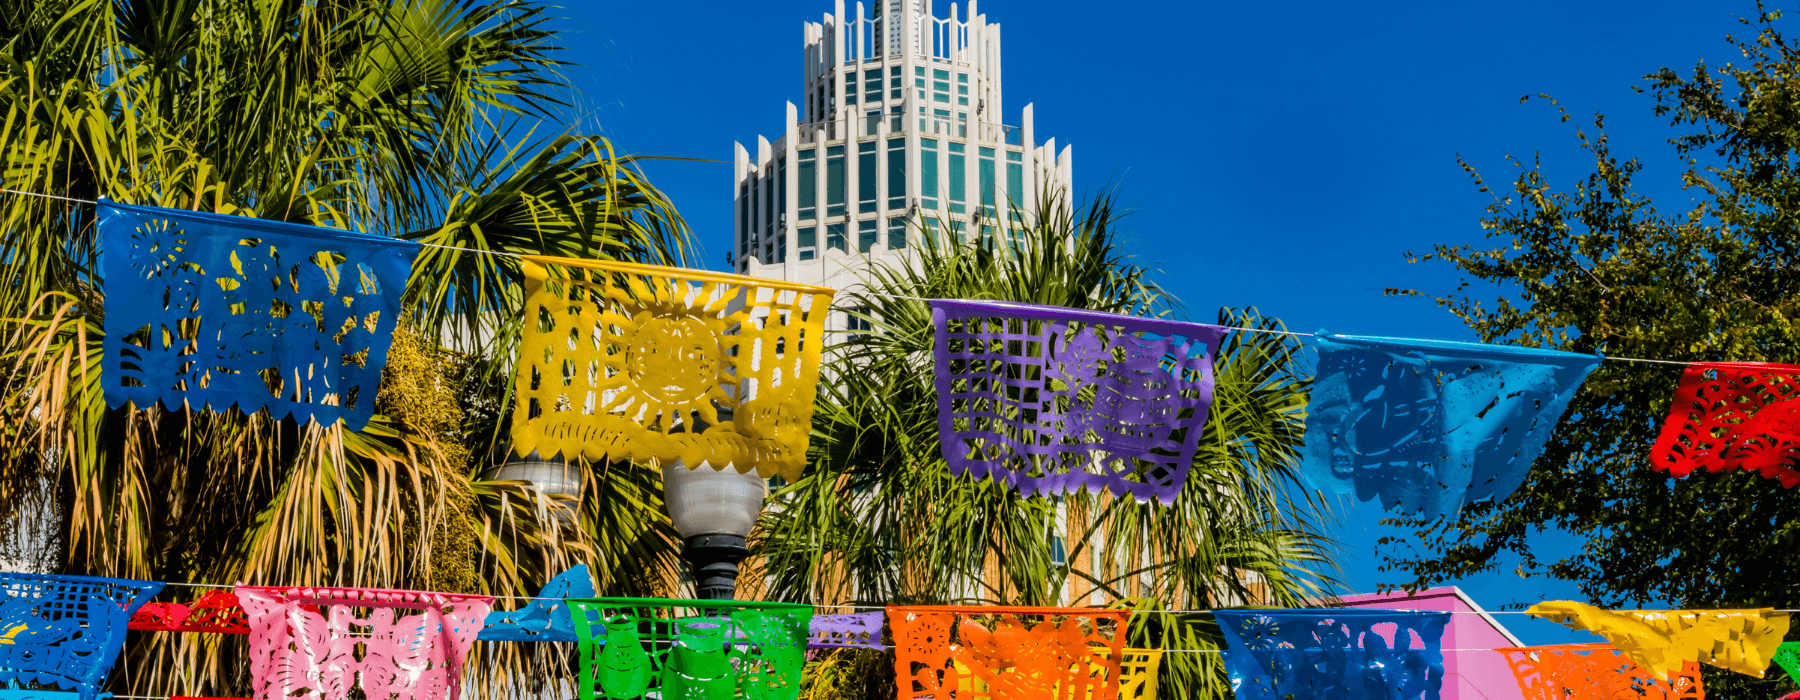 Colorful papel picado, traditional Mexican cutout banners, strung across a clear sky with palm trees and a tall, modern building in the background.